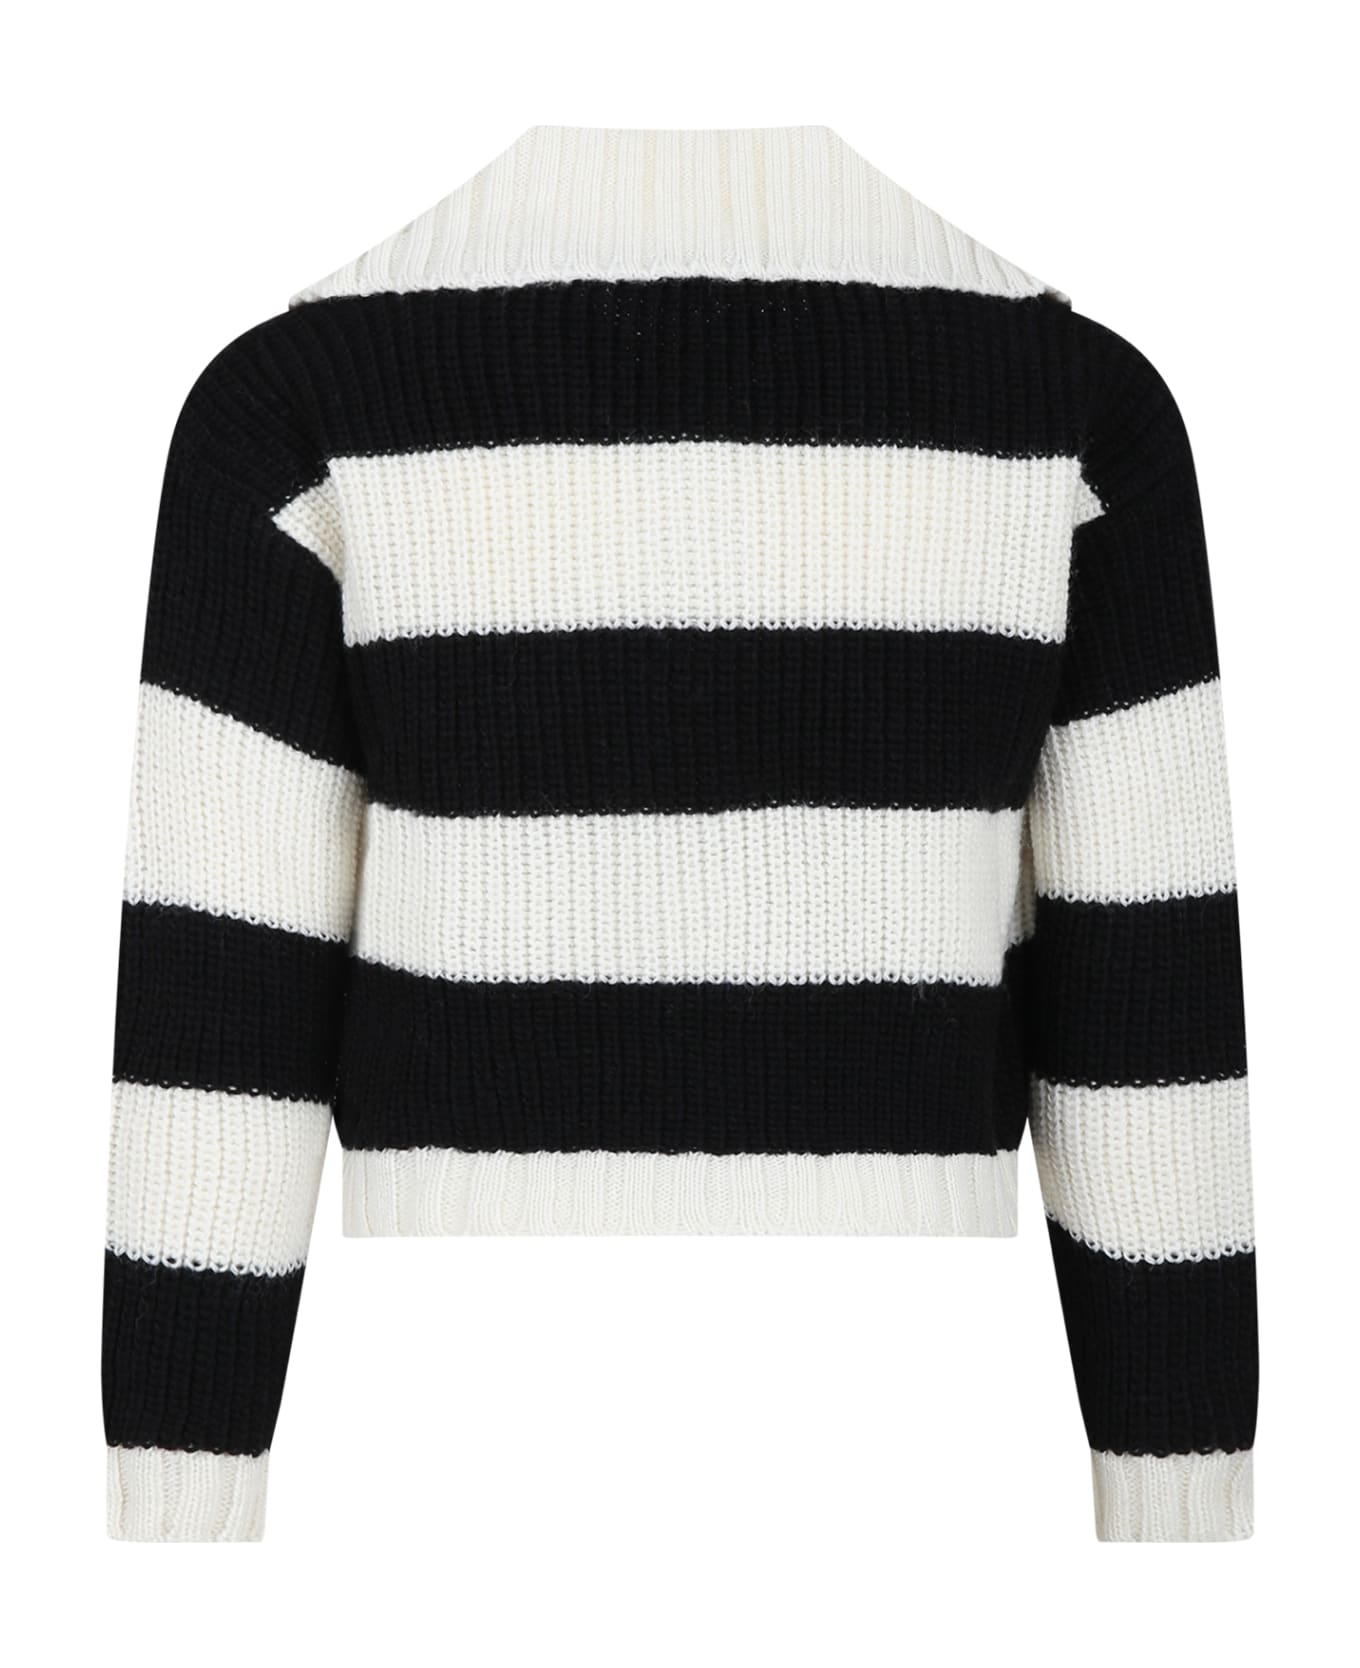 MSGM Black Sweater For Girl With Logo - Multicolor